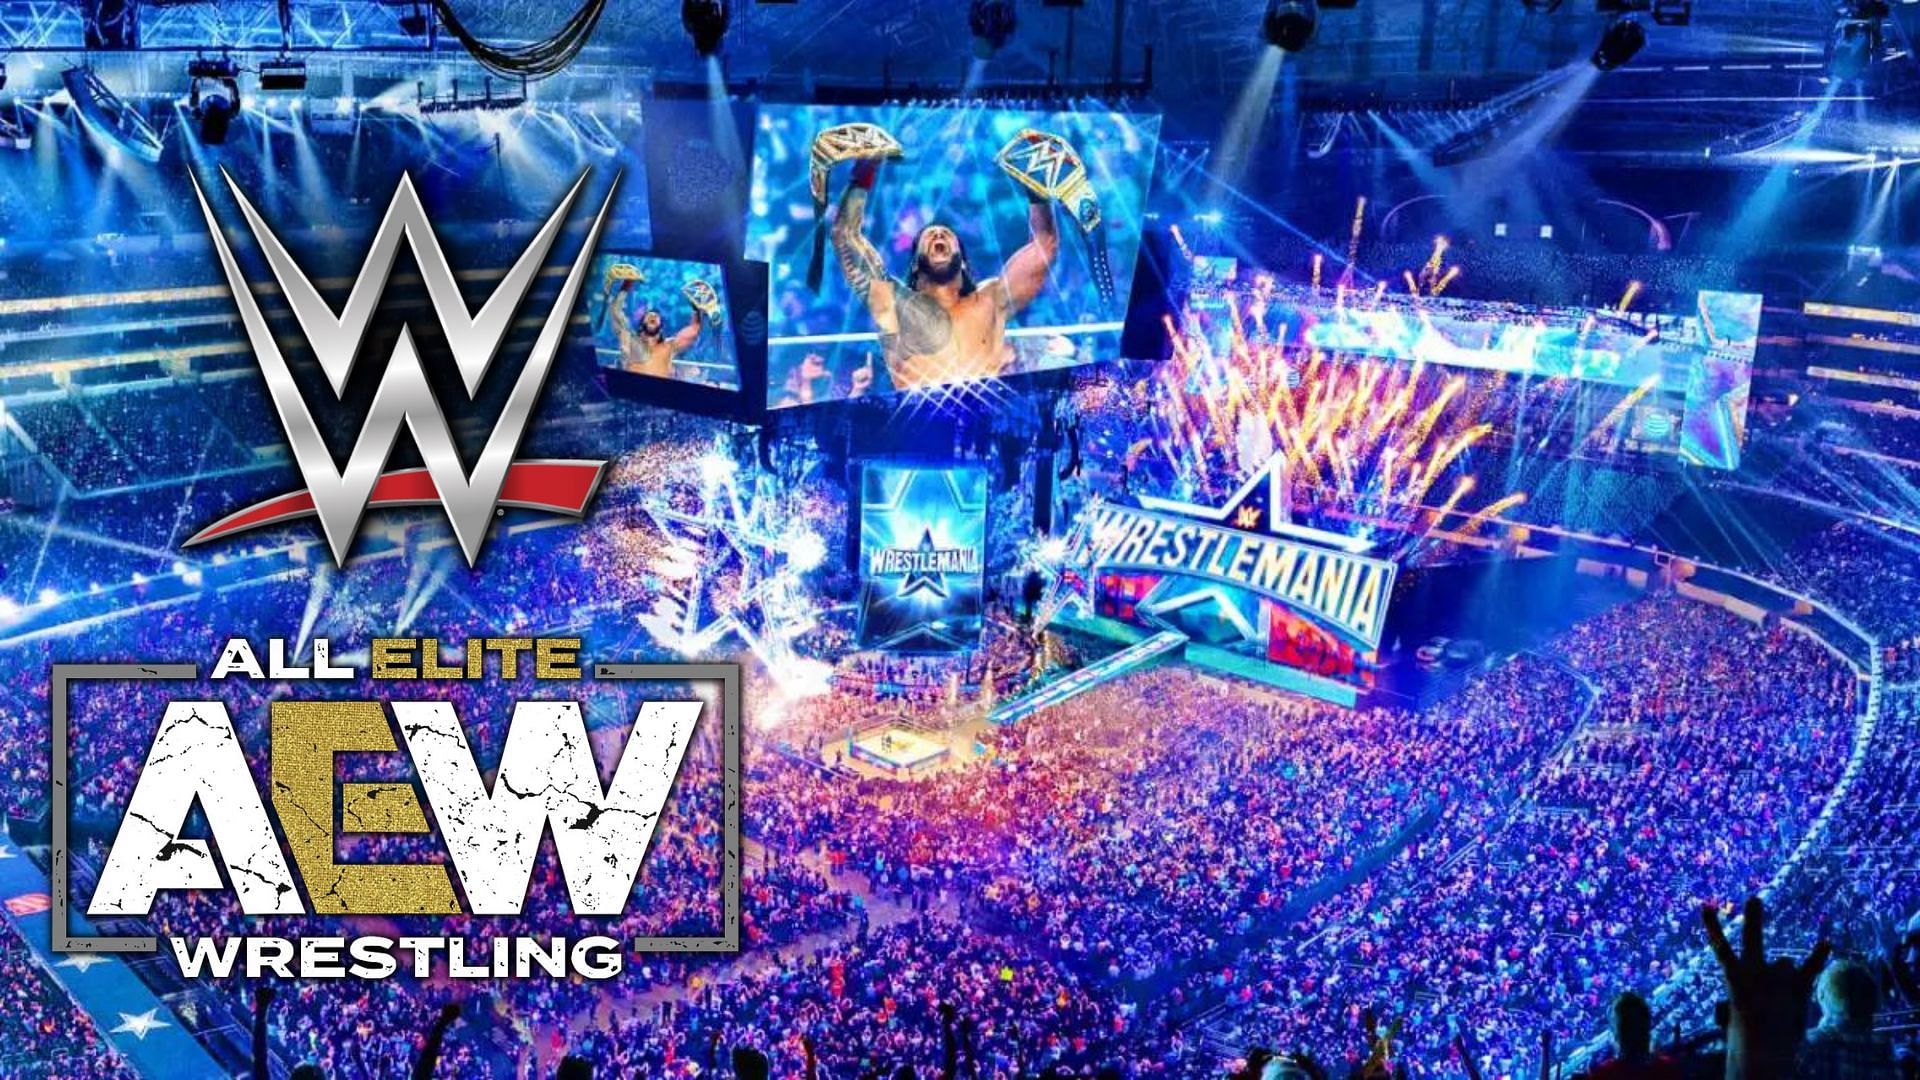 Will an AEW star appear at WrestleMania 39?